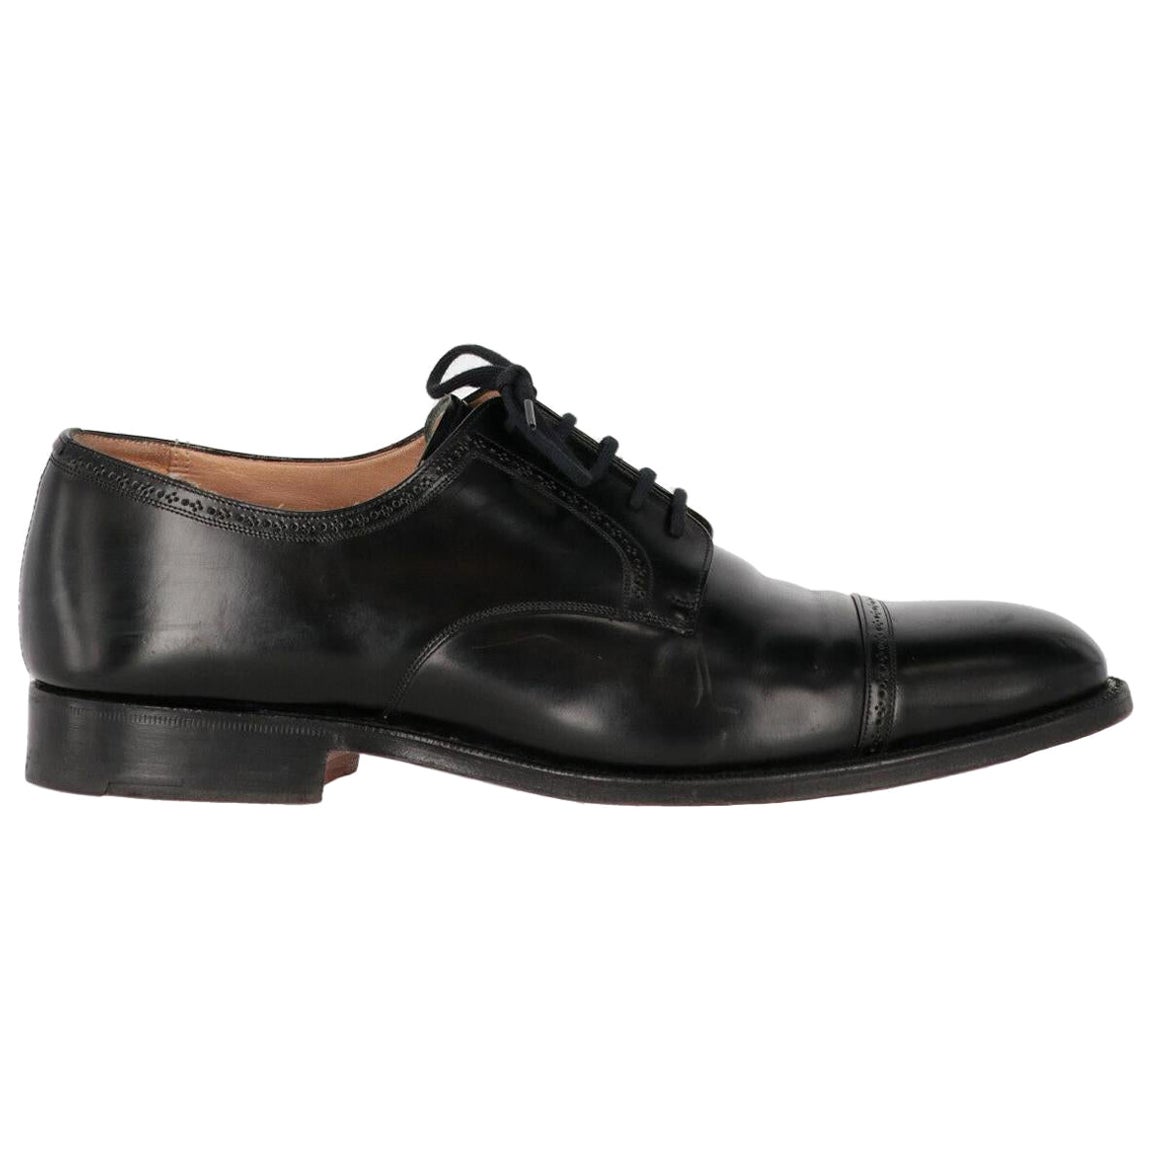 1990s Church's genuine black leather classic lace-up shoes